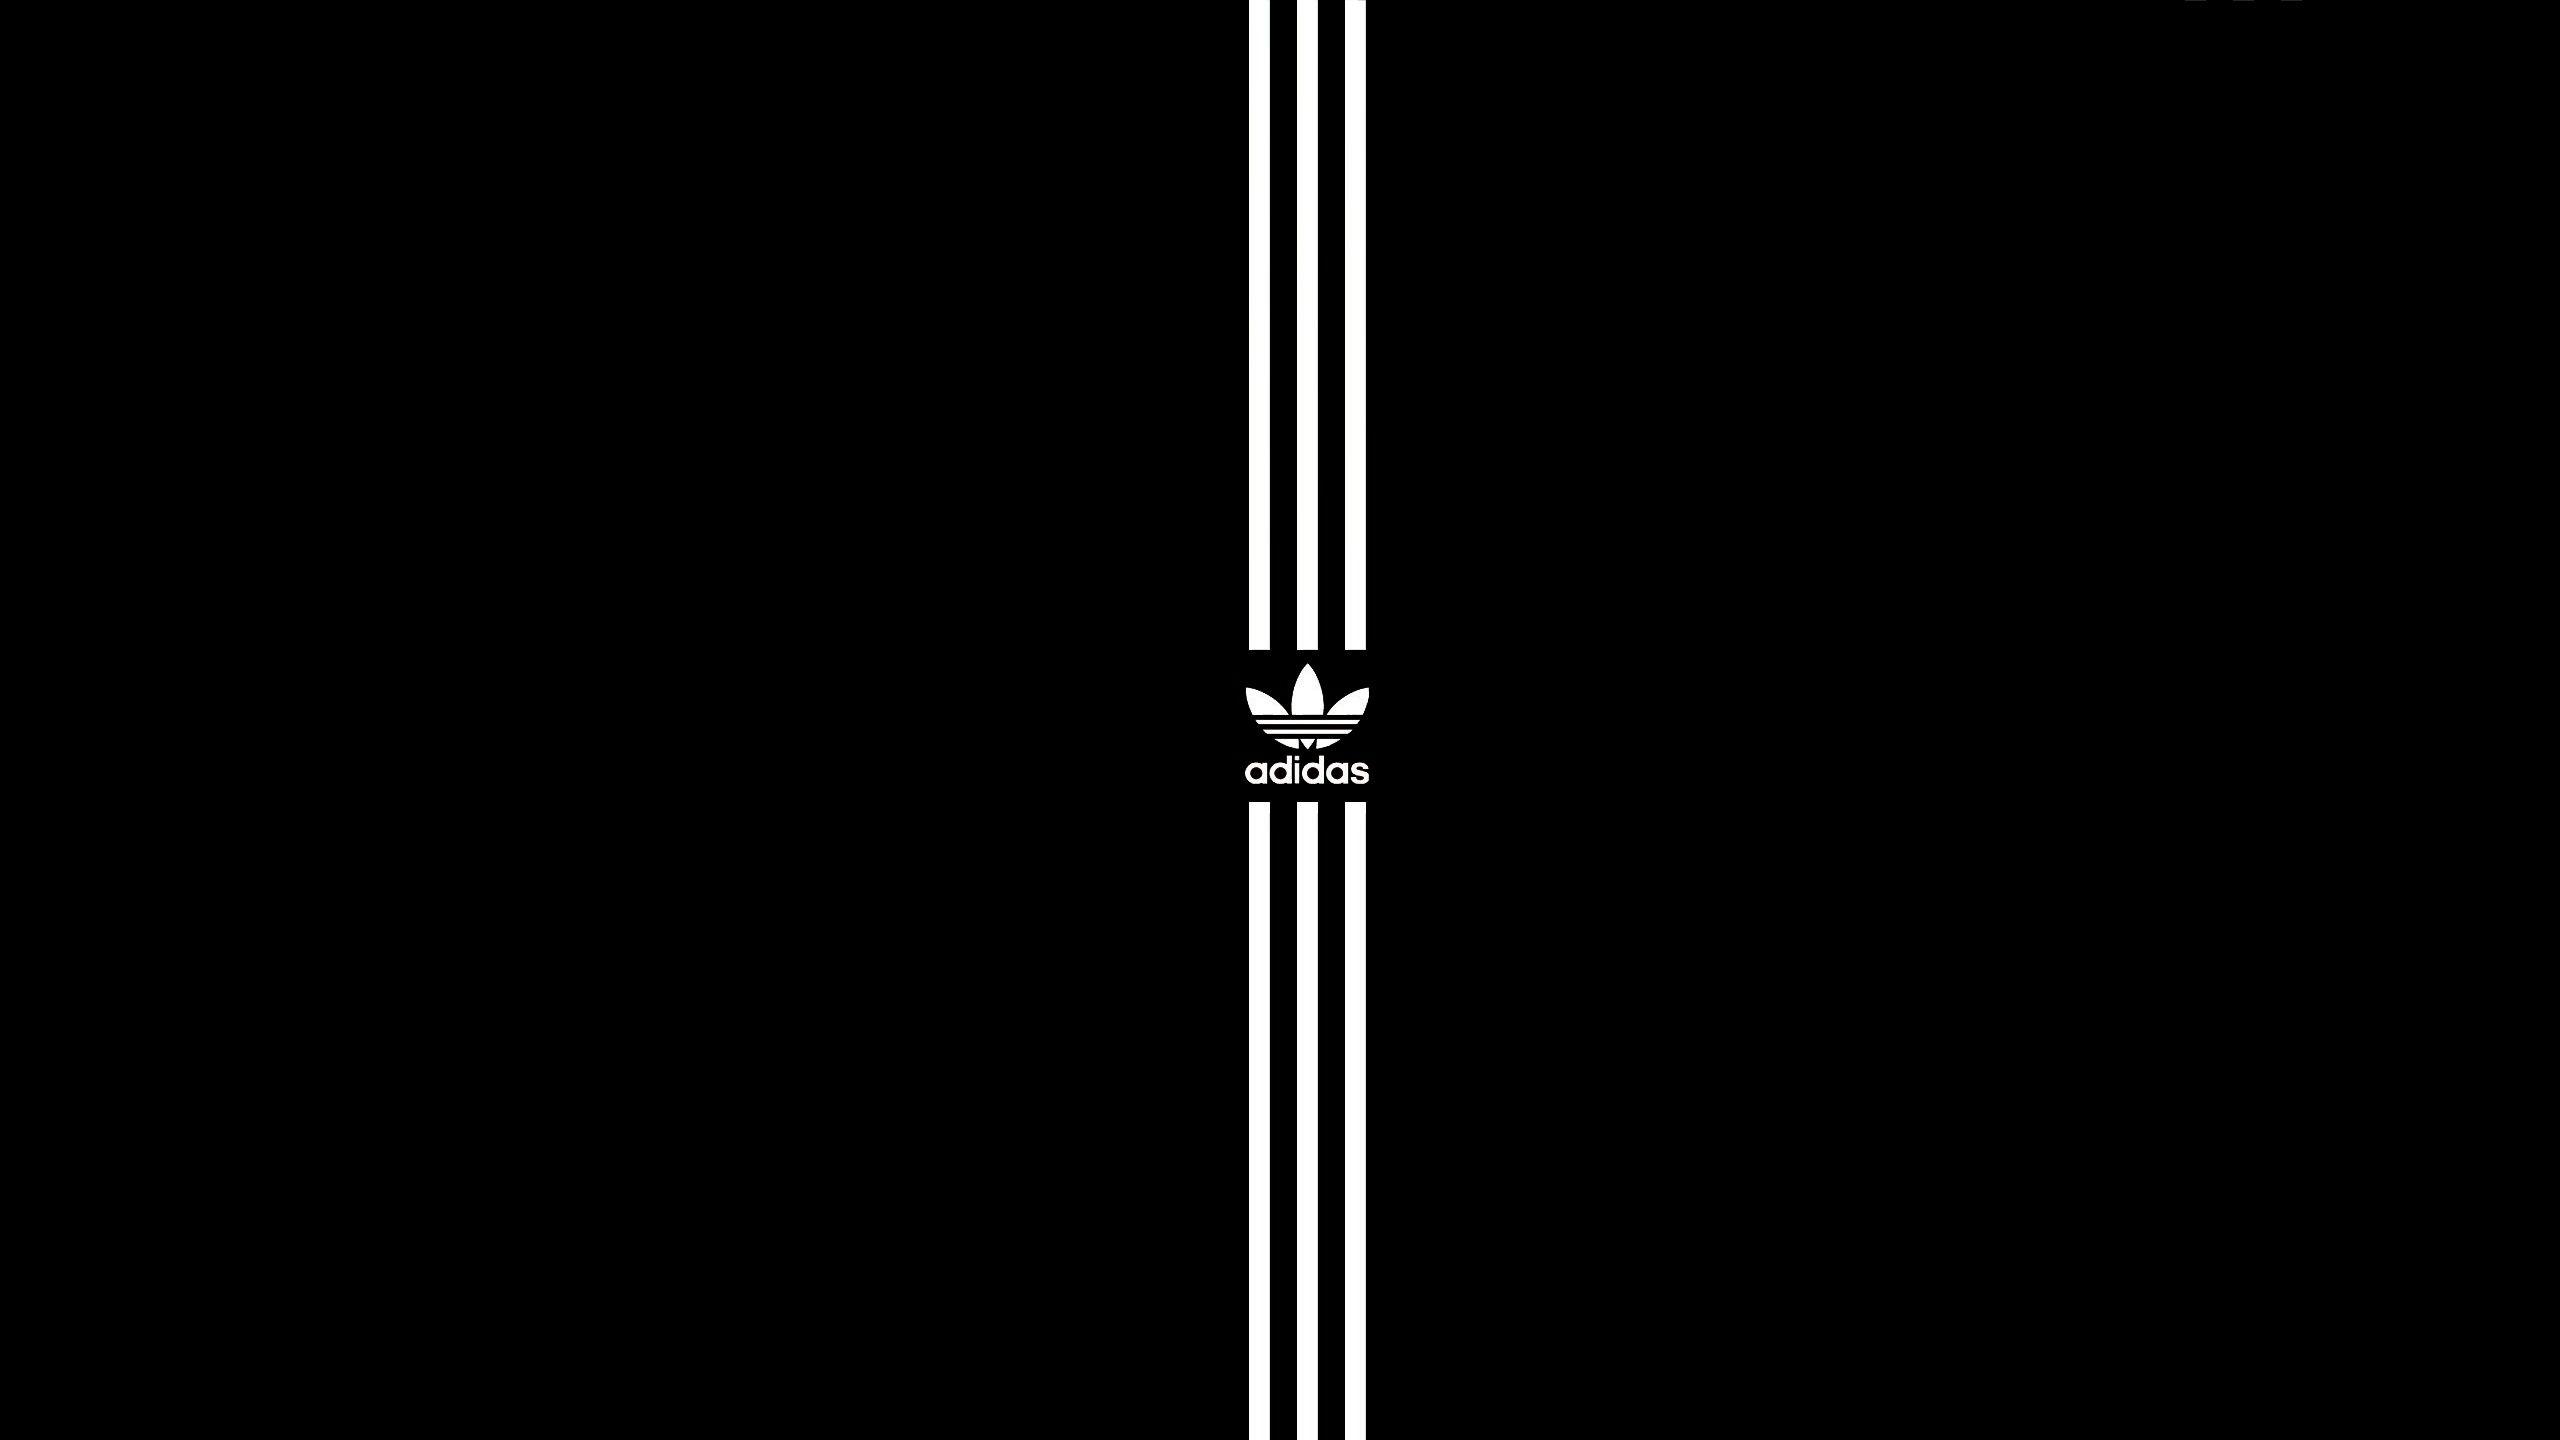 AZB 49 Adidas Wallpaper, Adidas Full HD Picture and Wallpaper